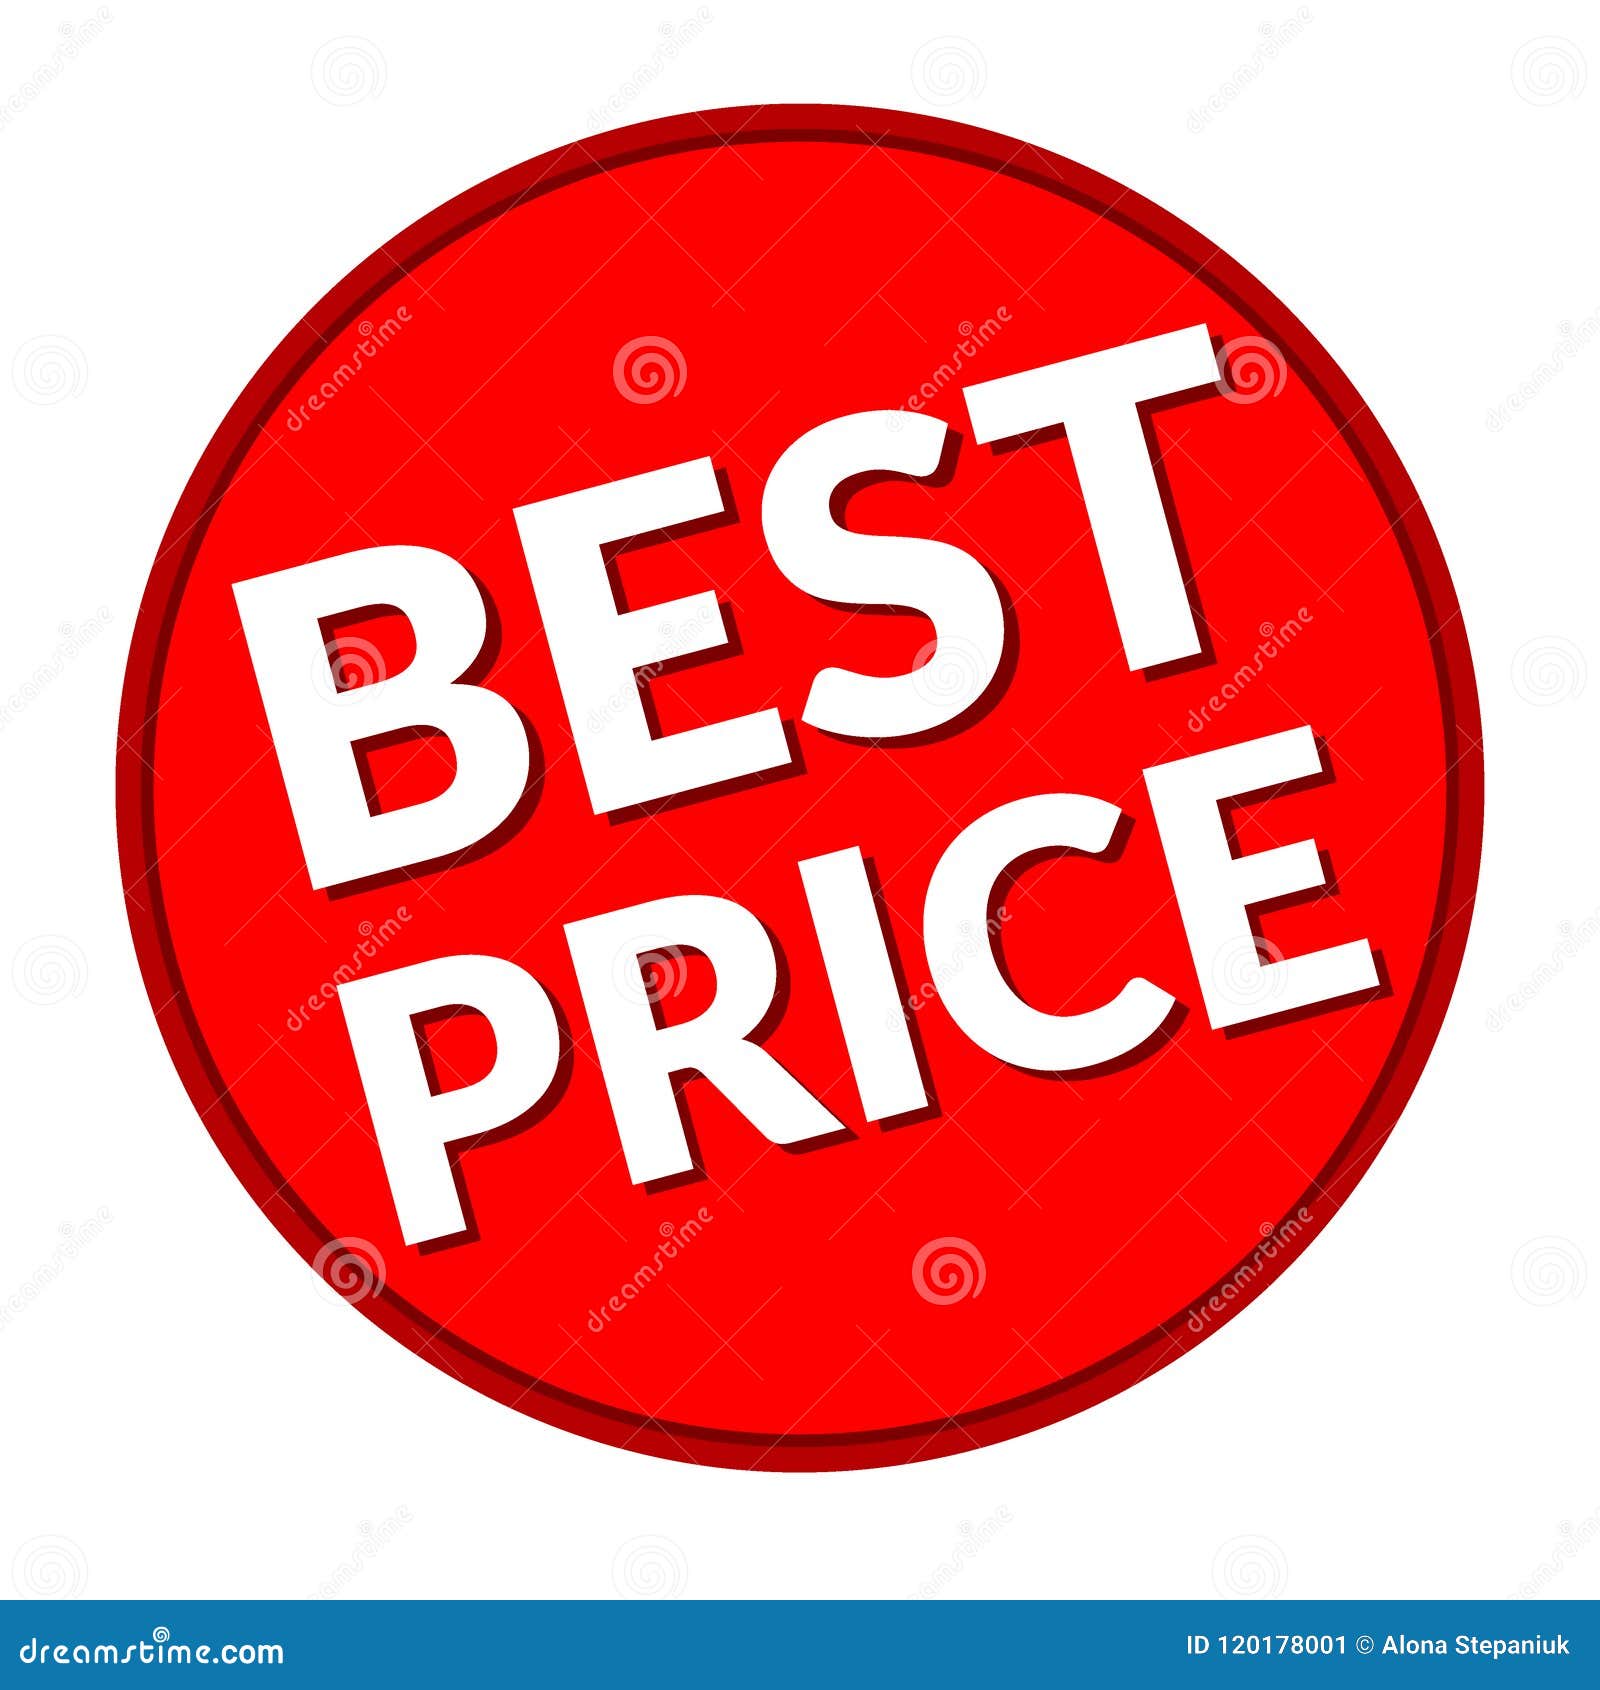 BEST price icon stock vector. Illustration of label - 120178001